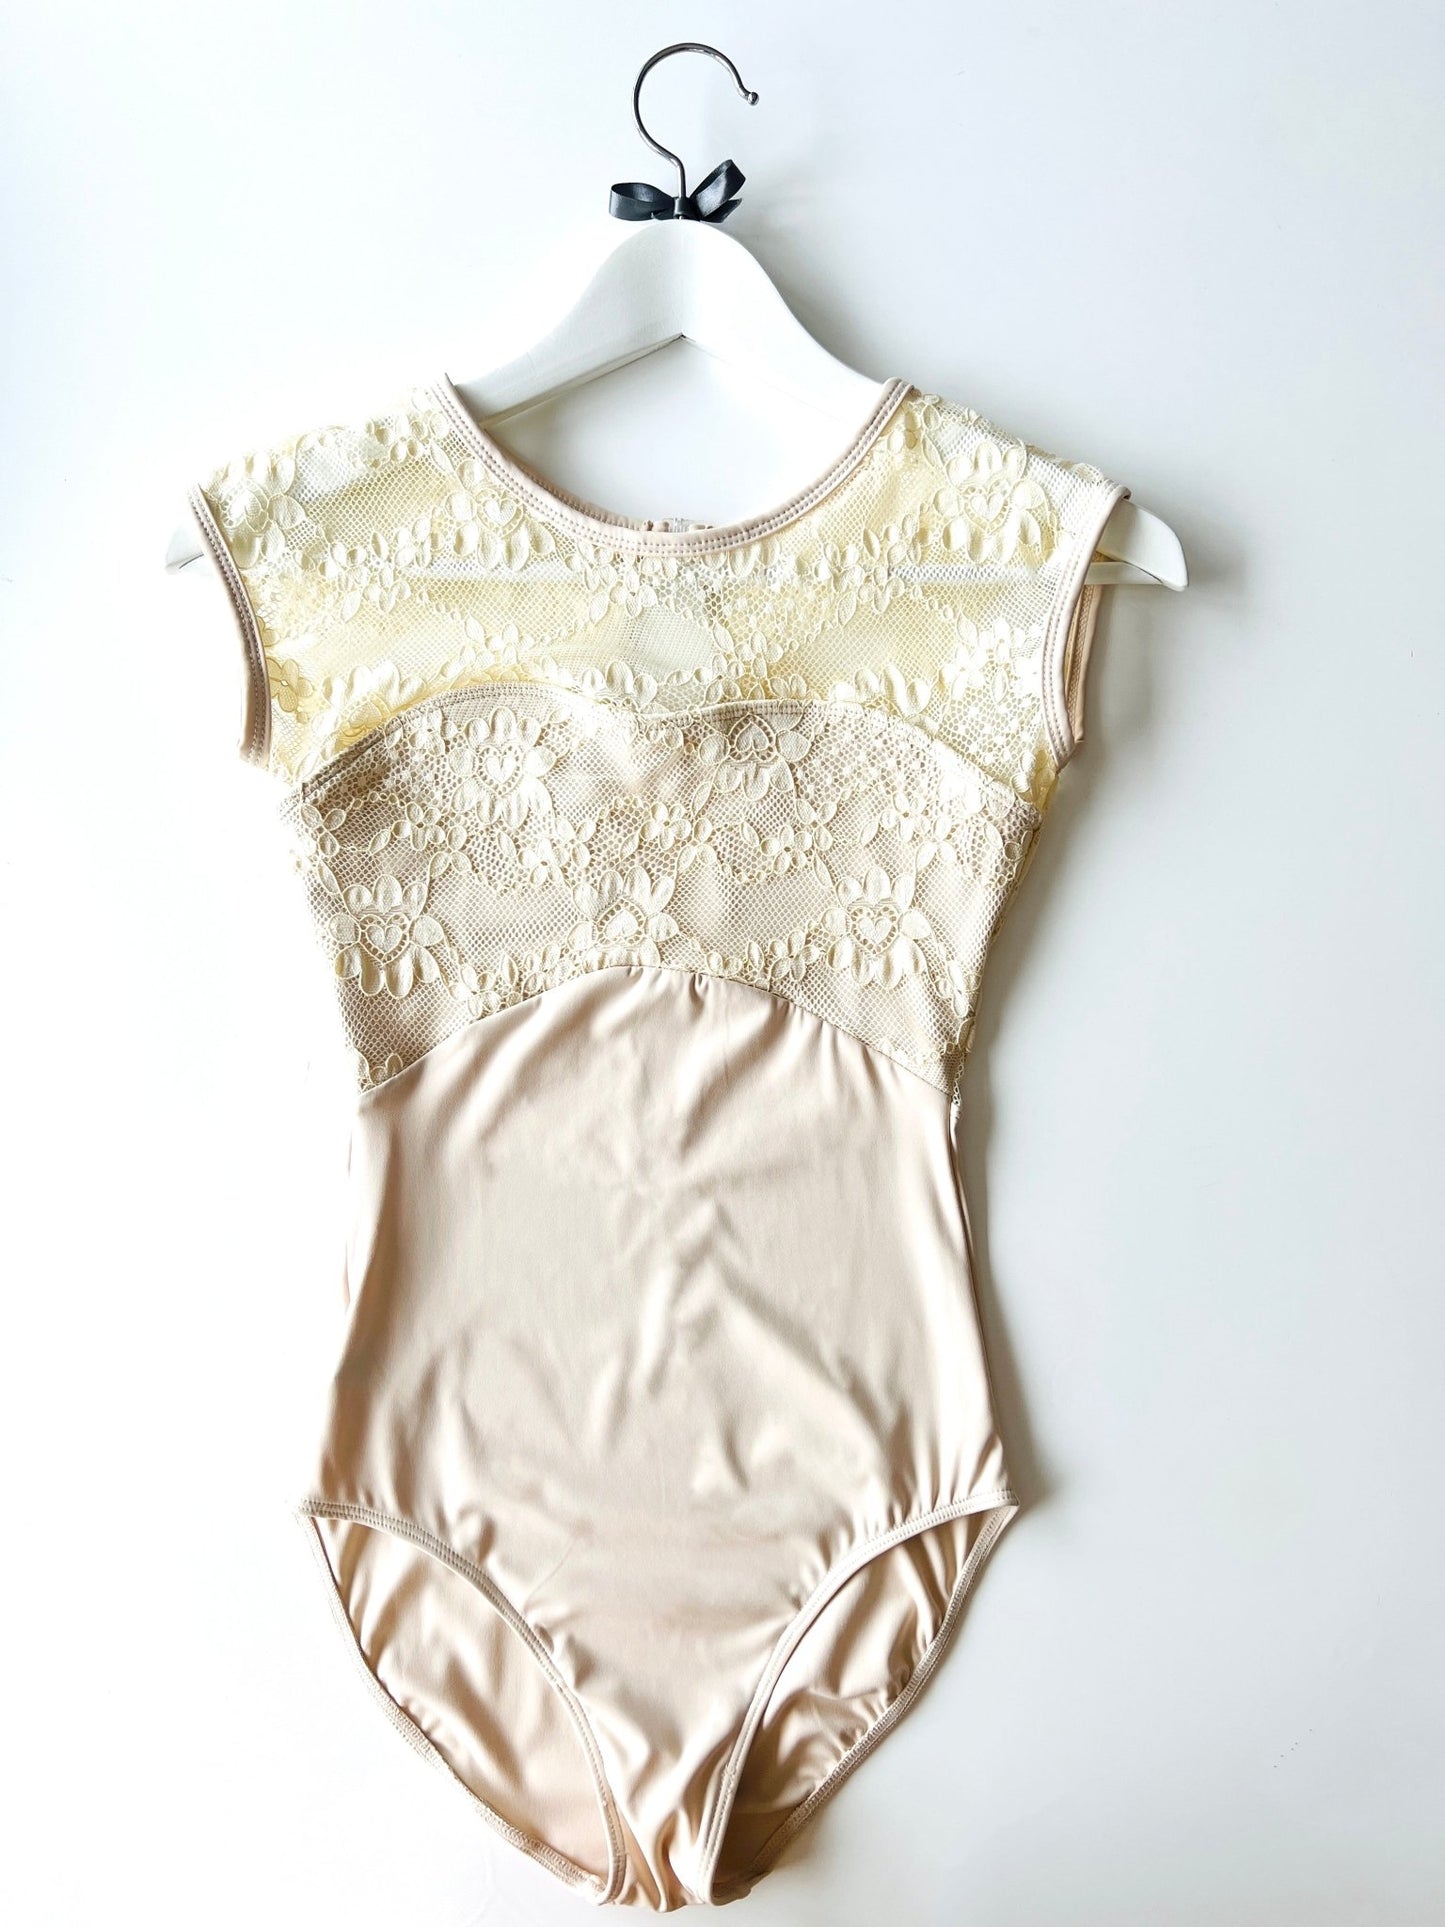 THE COLLECTIVE DANCEWEAR Lace Cap Sleeve Leotard - Antique Cream#mLeotardTHE COLLECTIVE DANCEWEAR